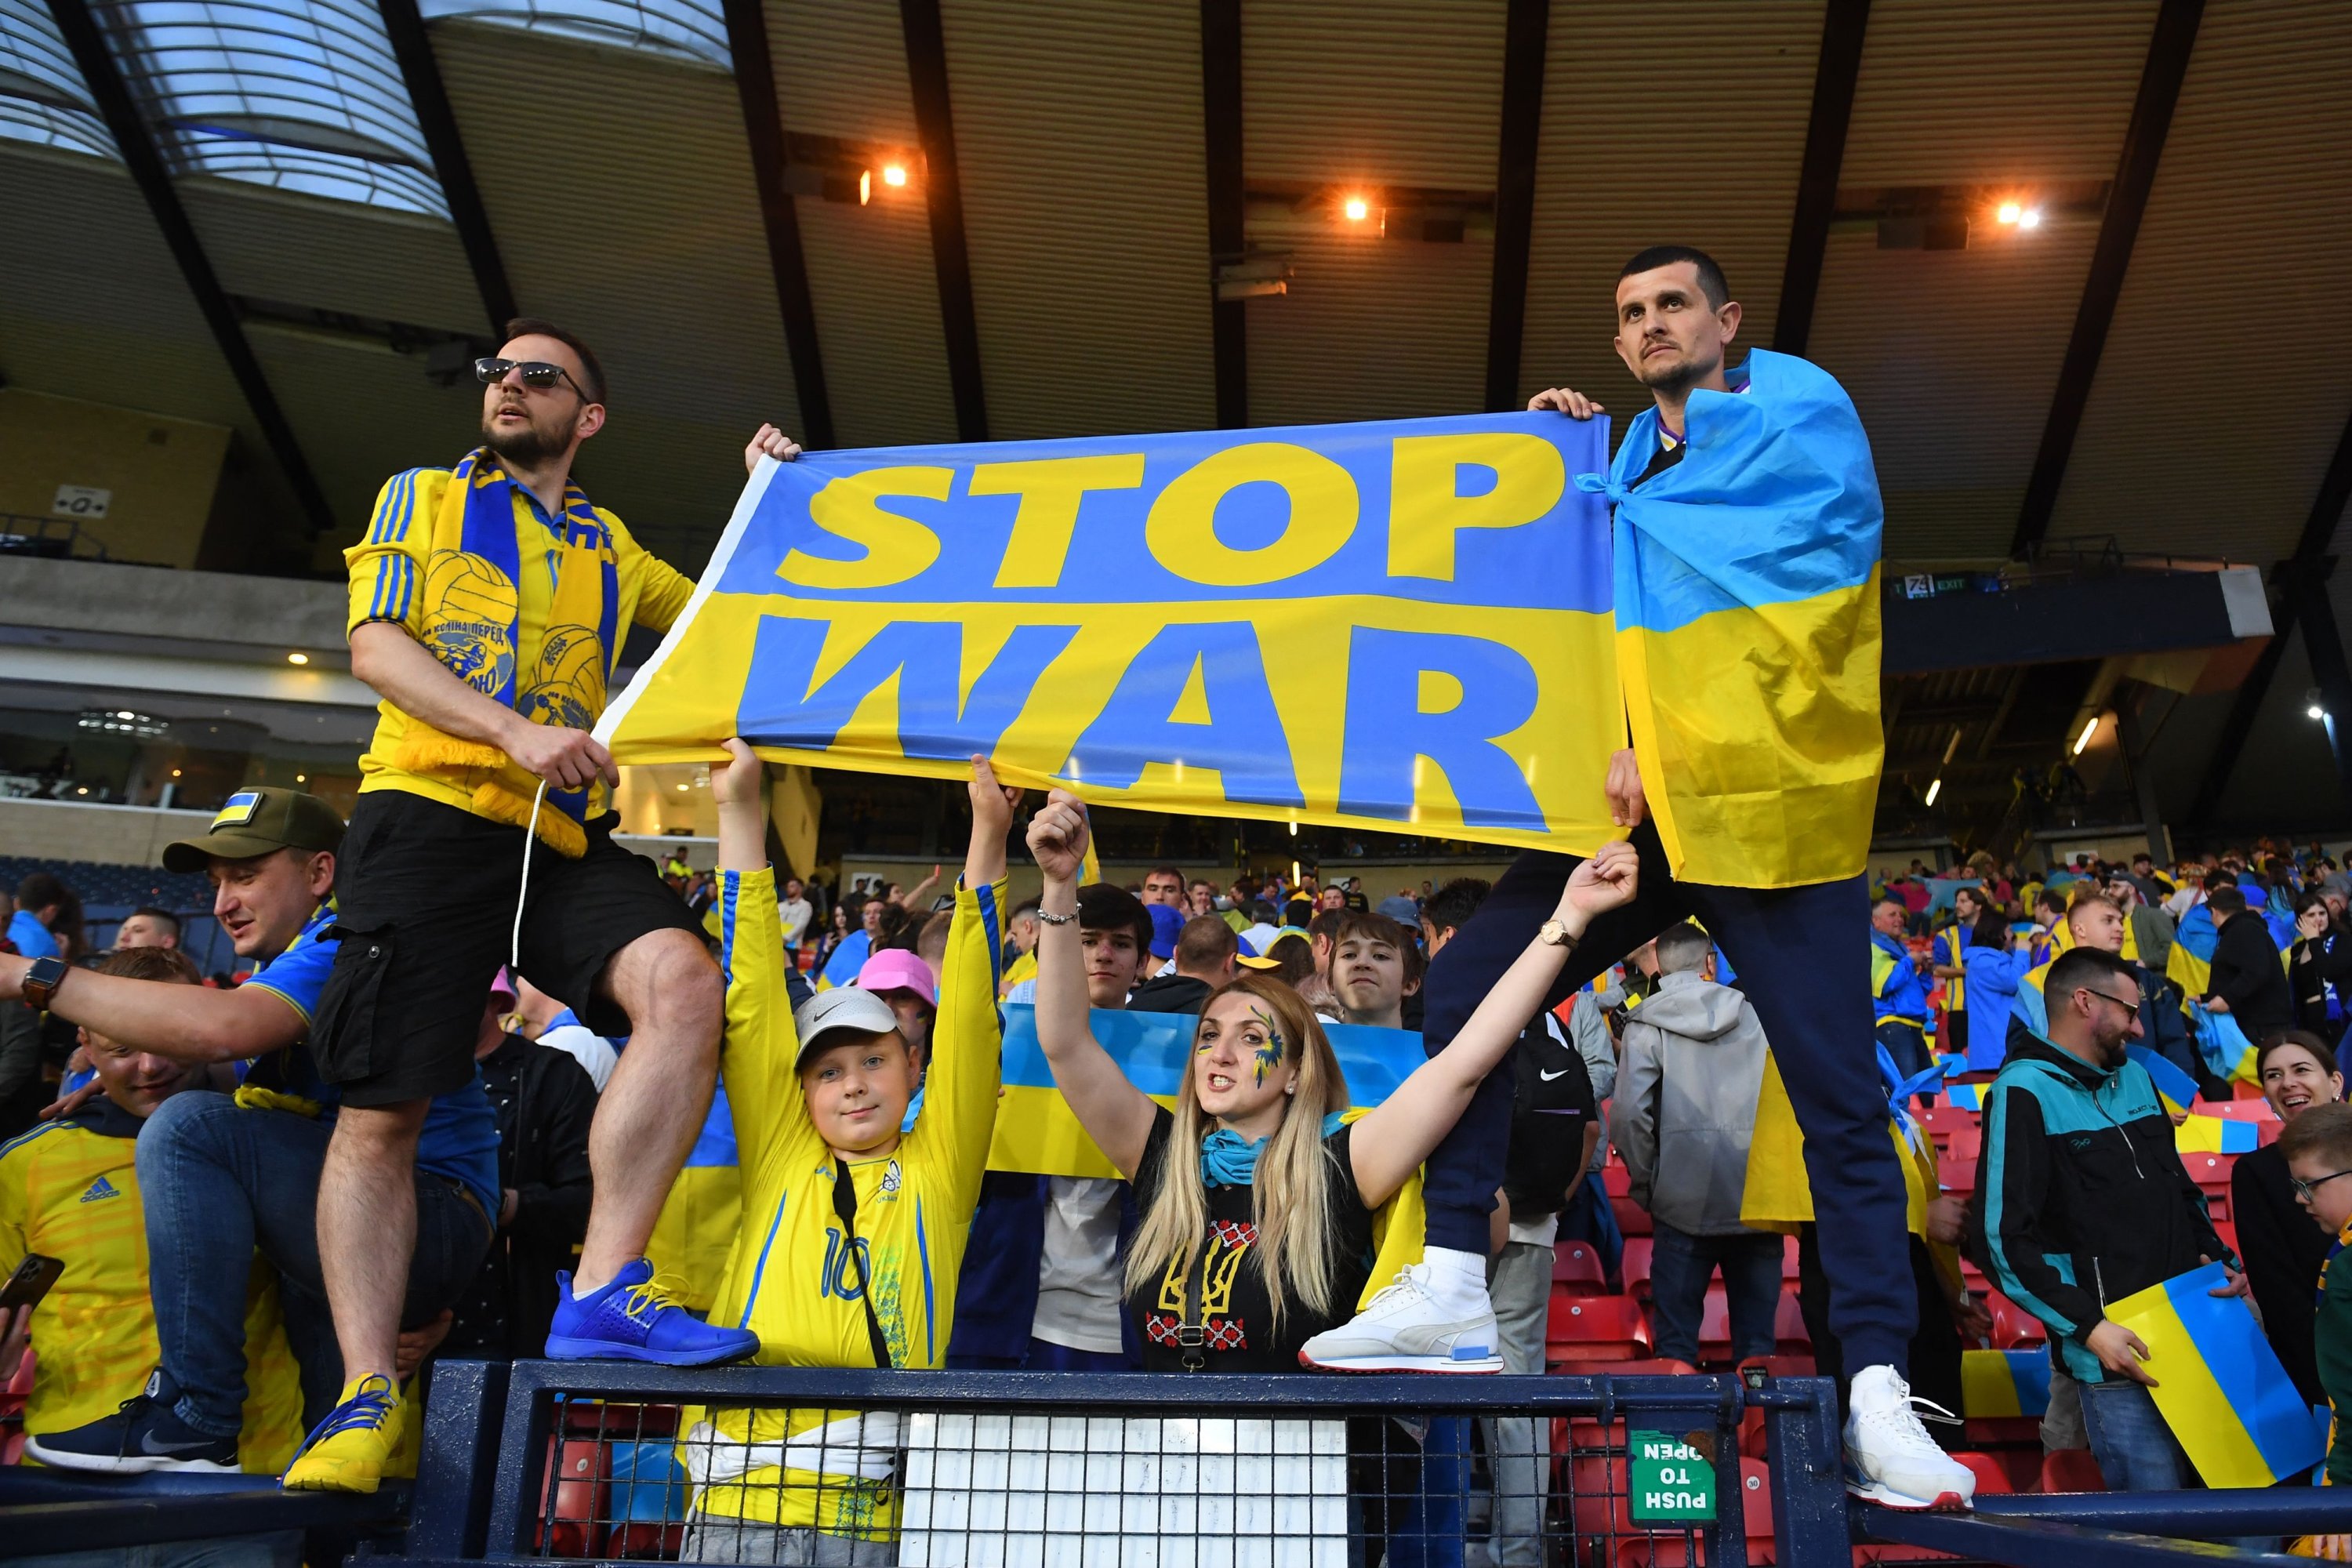 Fans draped in Ukraine national flags hold a banner during the FIFA World Cup 2022 playoff semifinal qualifier football match between Scotland and Ukraine at Hampden Park in Glasgow, Scotland on June 1, 2022. (AFP Photo)